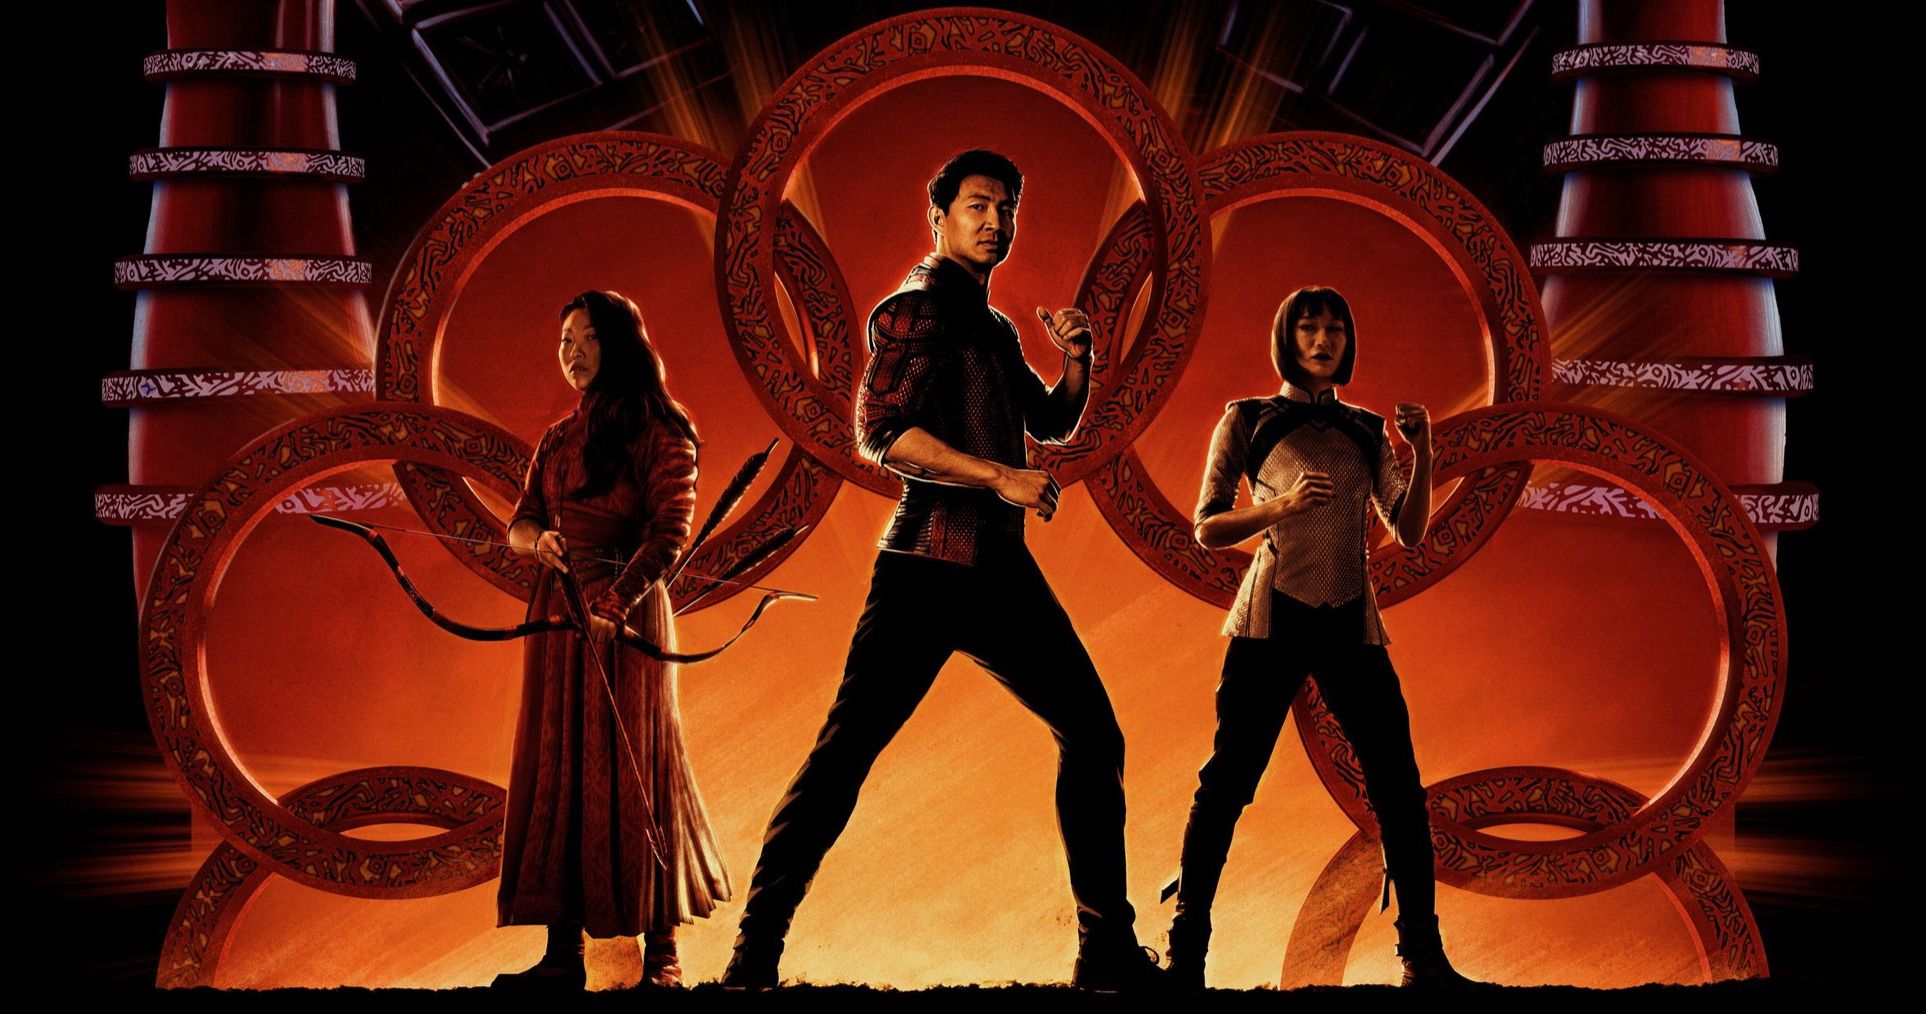 Shang-Chi Director Confirms Post-Credit Scene 'Worth Sticking Around For'